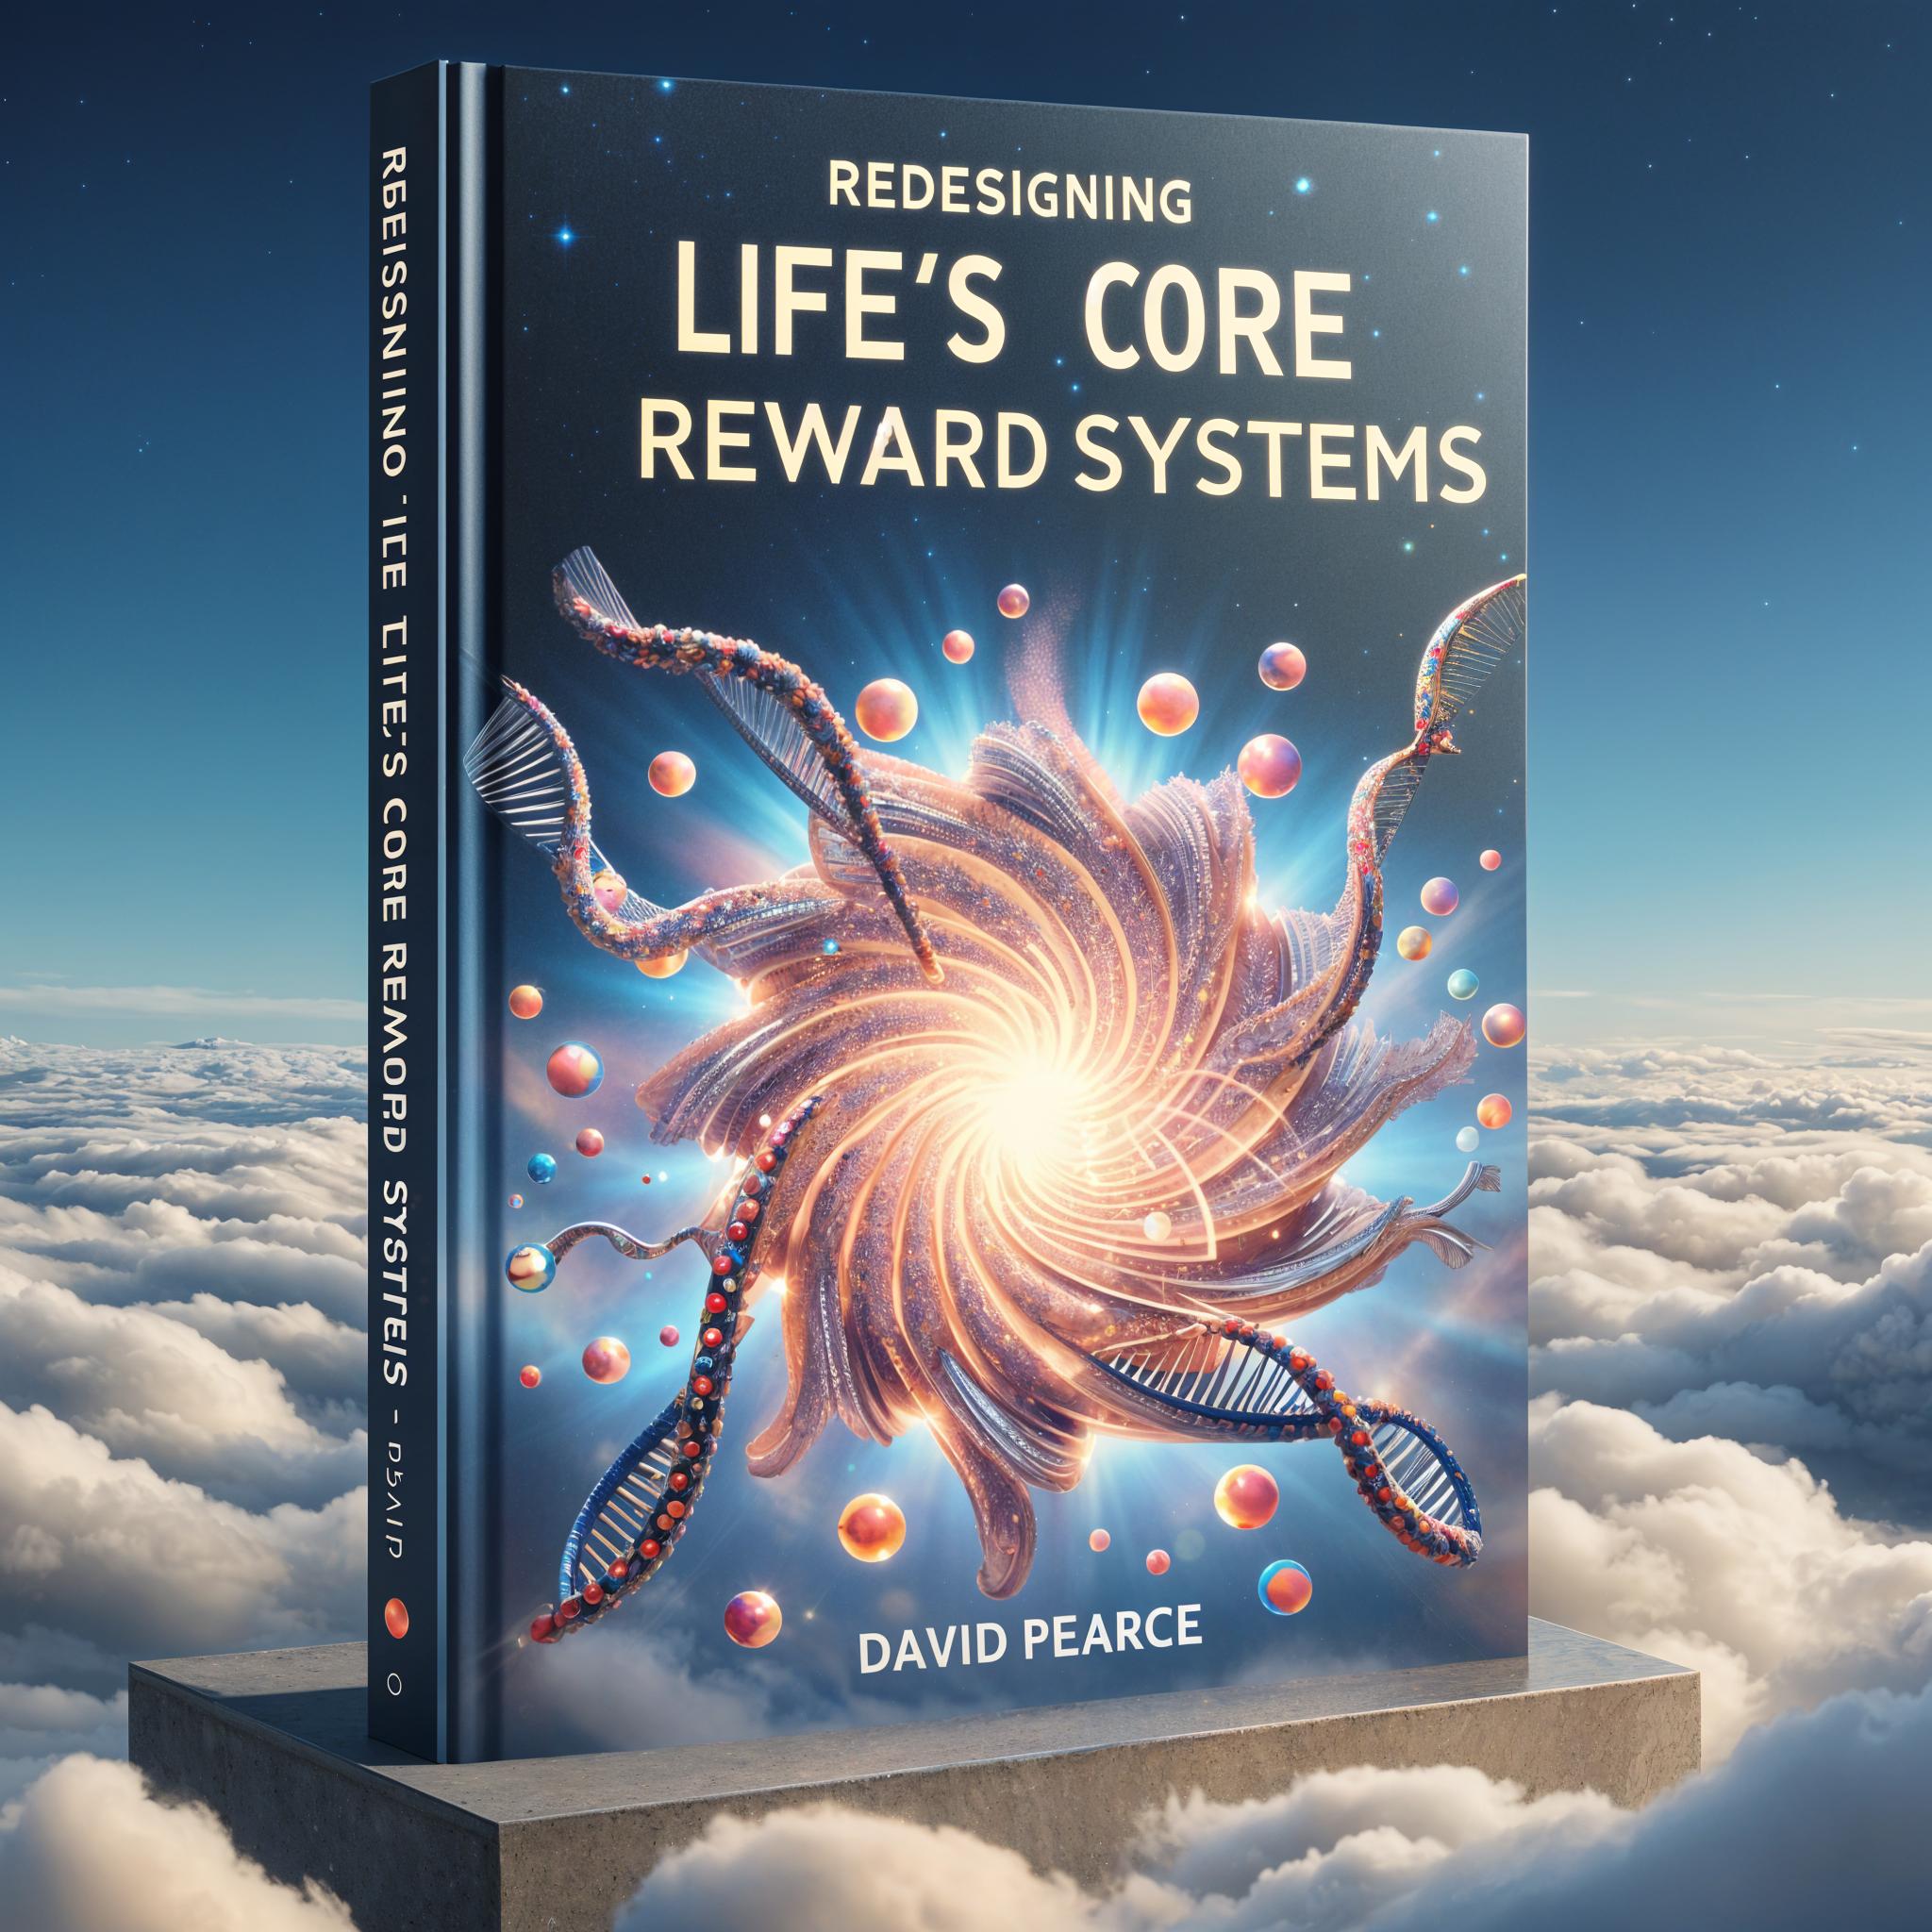 Redesigning Life's Core Reward Systems by David Pearce